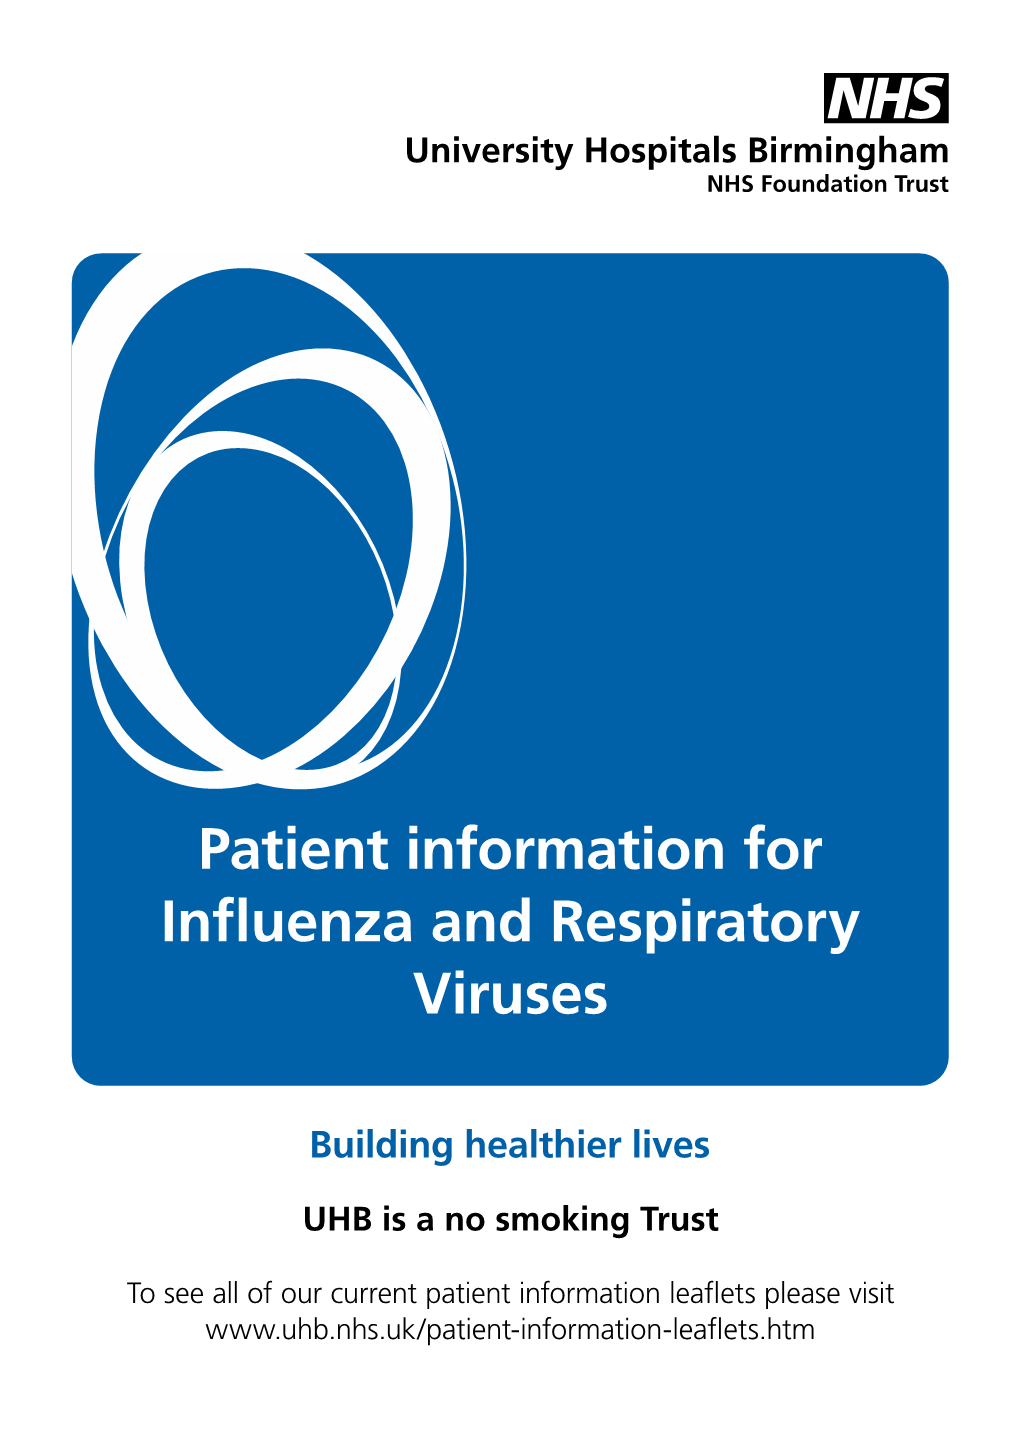 Patient Information for Influenza and Respiratory Viruses